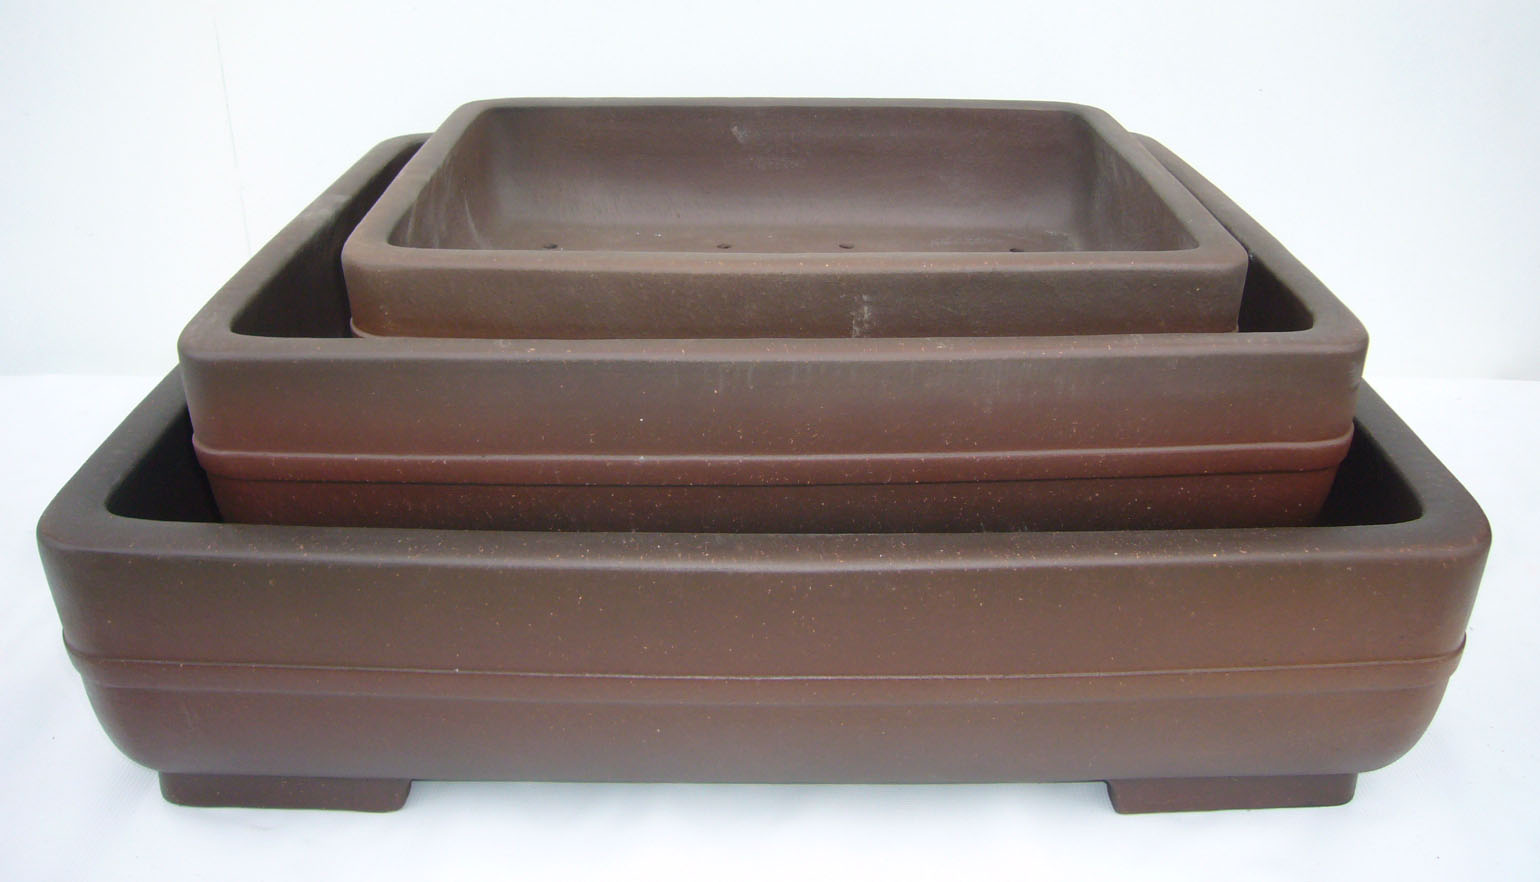 Exporting bonsai pot、This online shop specializes in High-value